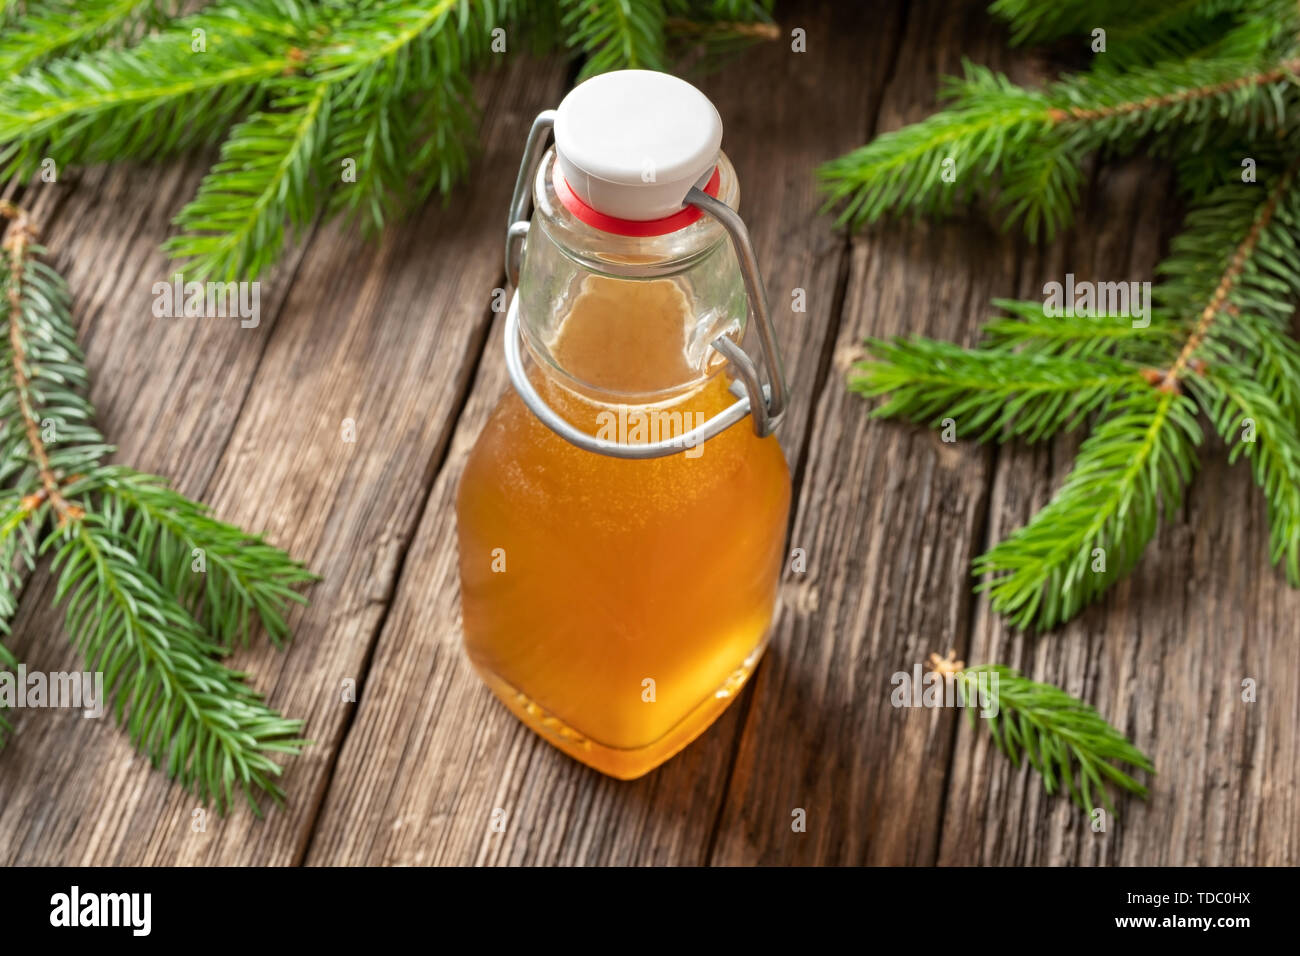 A bottle of homemade syrup against cough made from young spruce tips Stock Photo